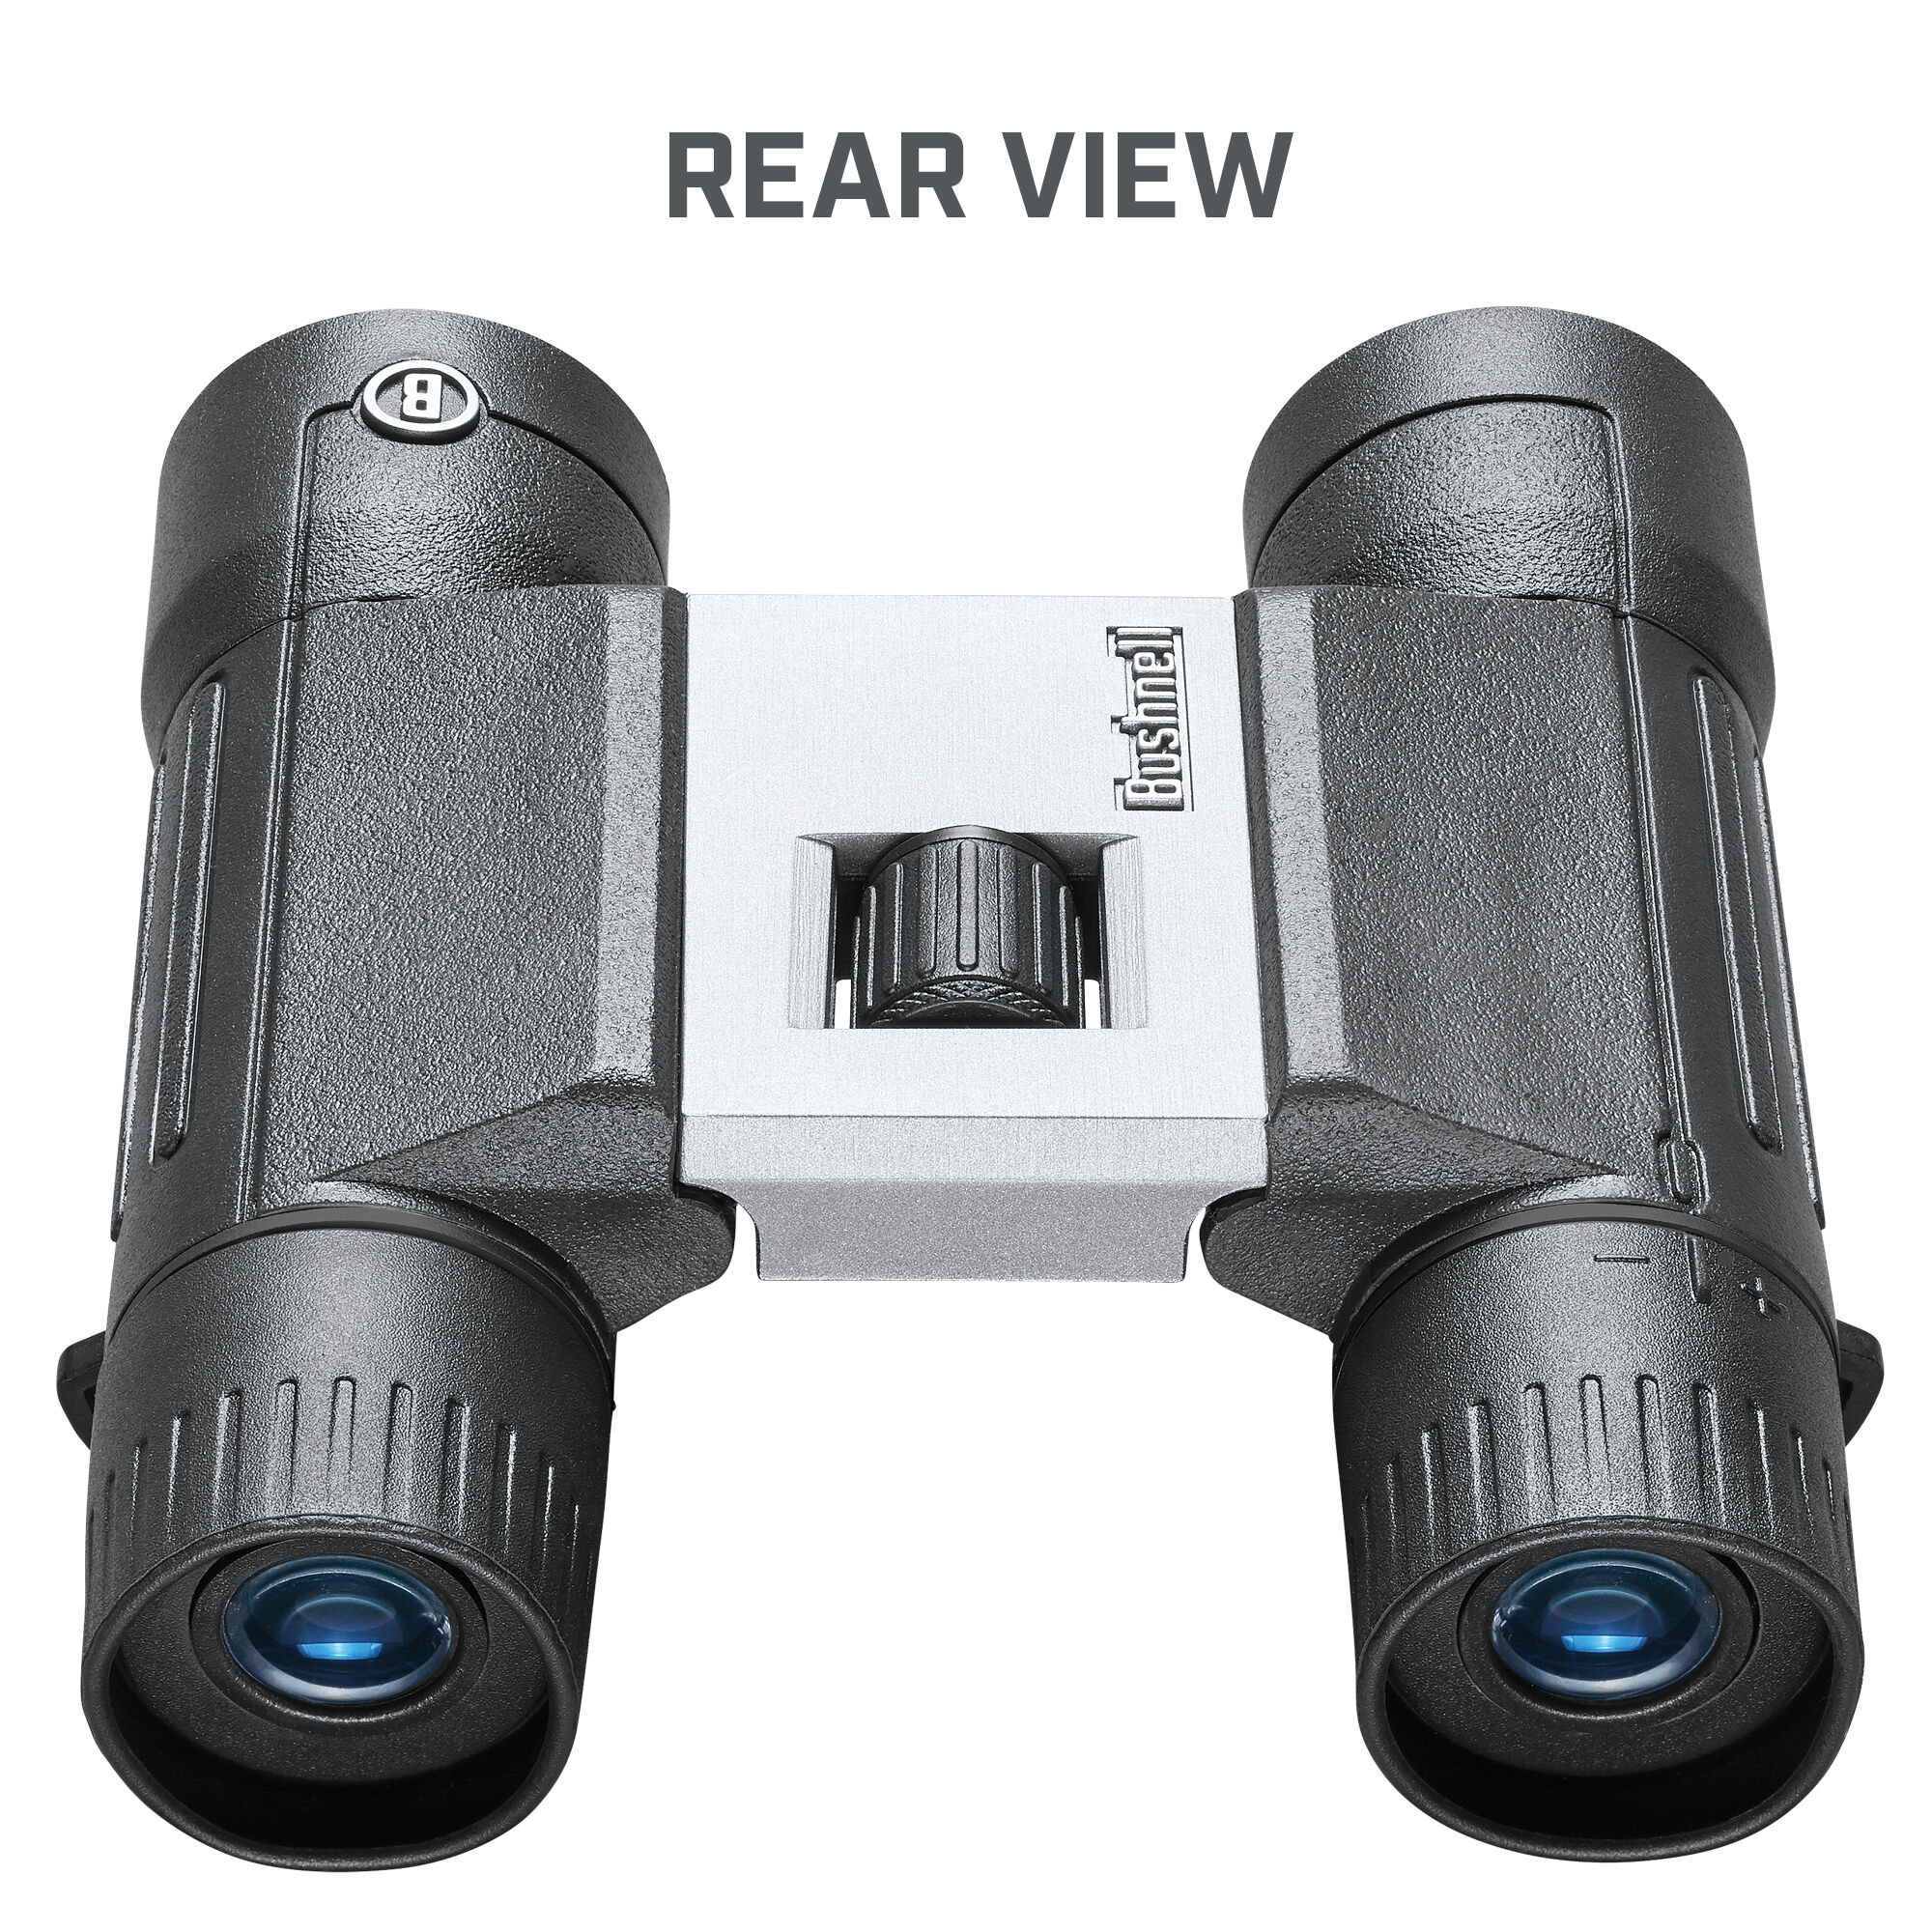 Powerview 2 Compact Binoculars, 10x25 Magnification| Bushnell